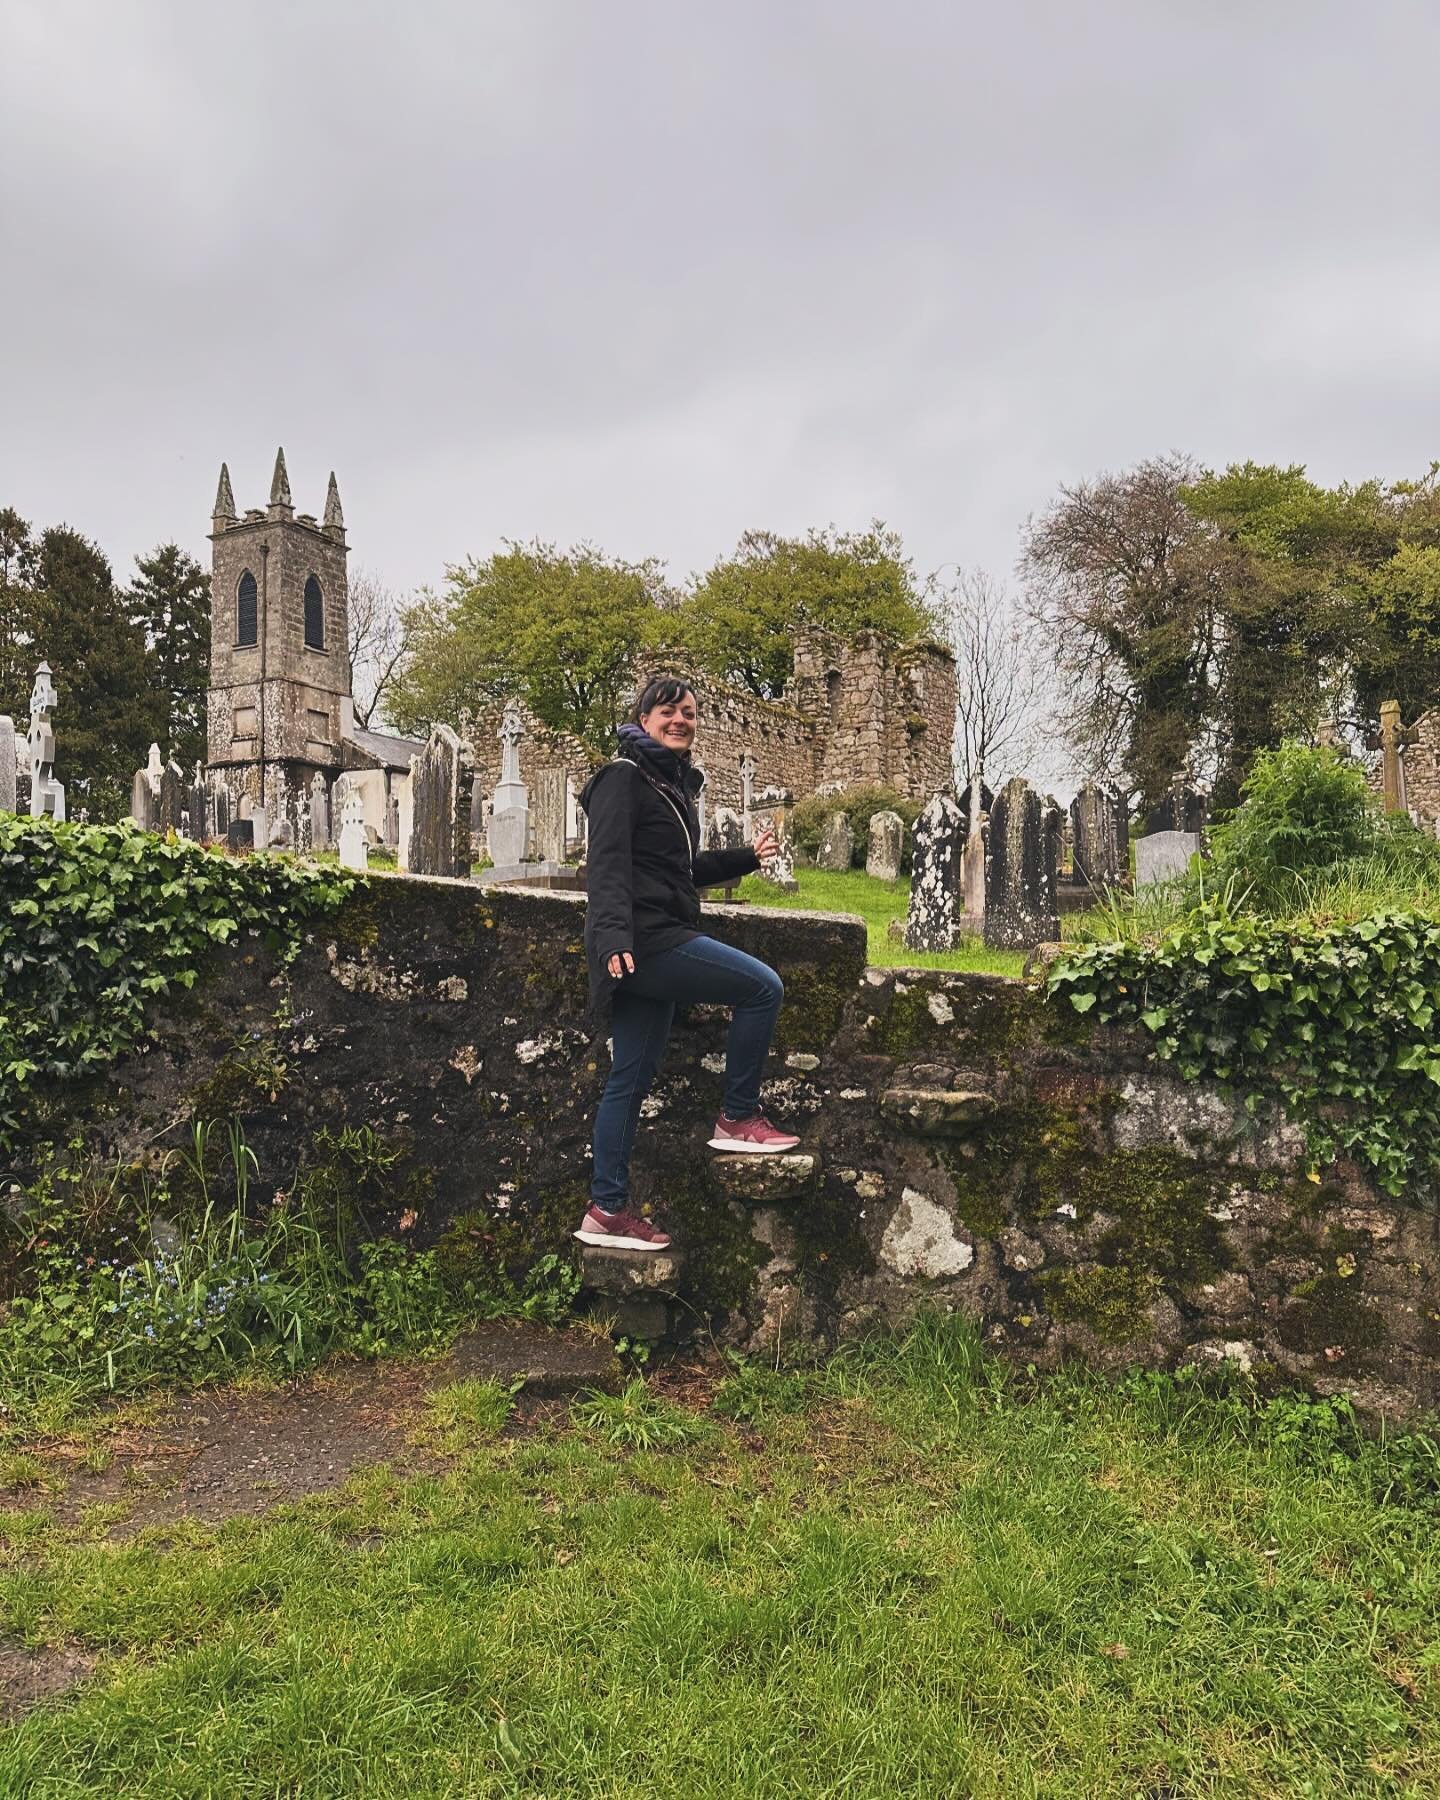 Hiking my way through Ireland 🇮🇪 while learning about Irish food and baked goods. Scone baking (and eating) class tomorrow morning! I will be brining back these decadent recipes to share in an Irish cooking class. 

The Wild Table will be closed Sa